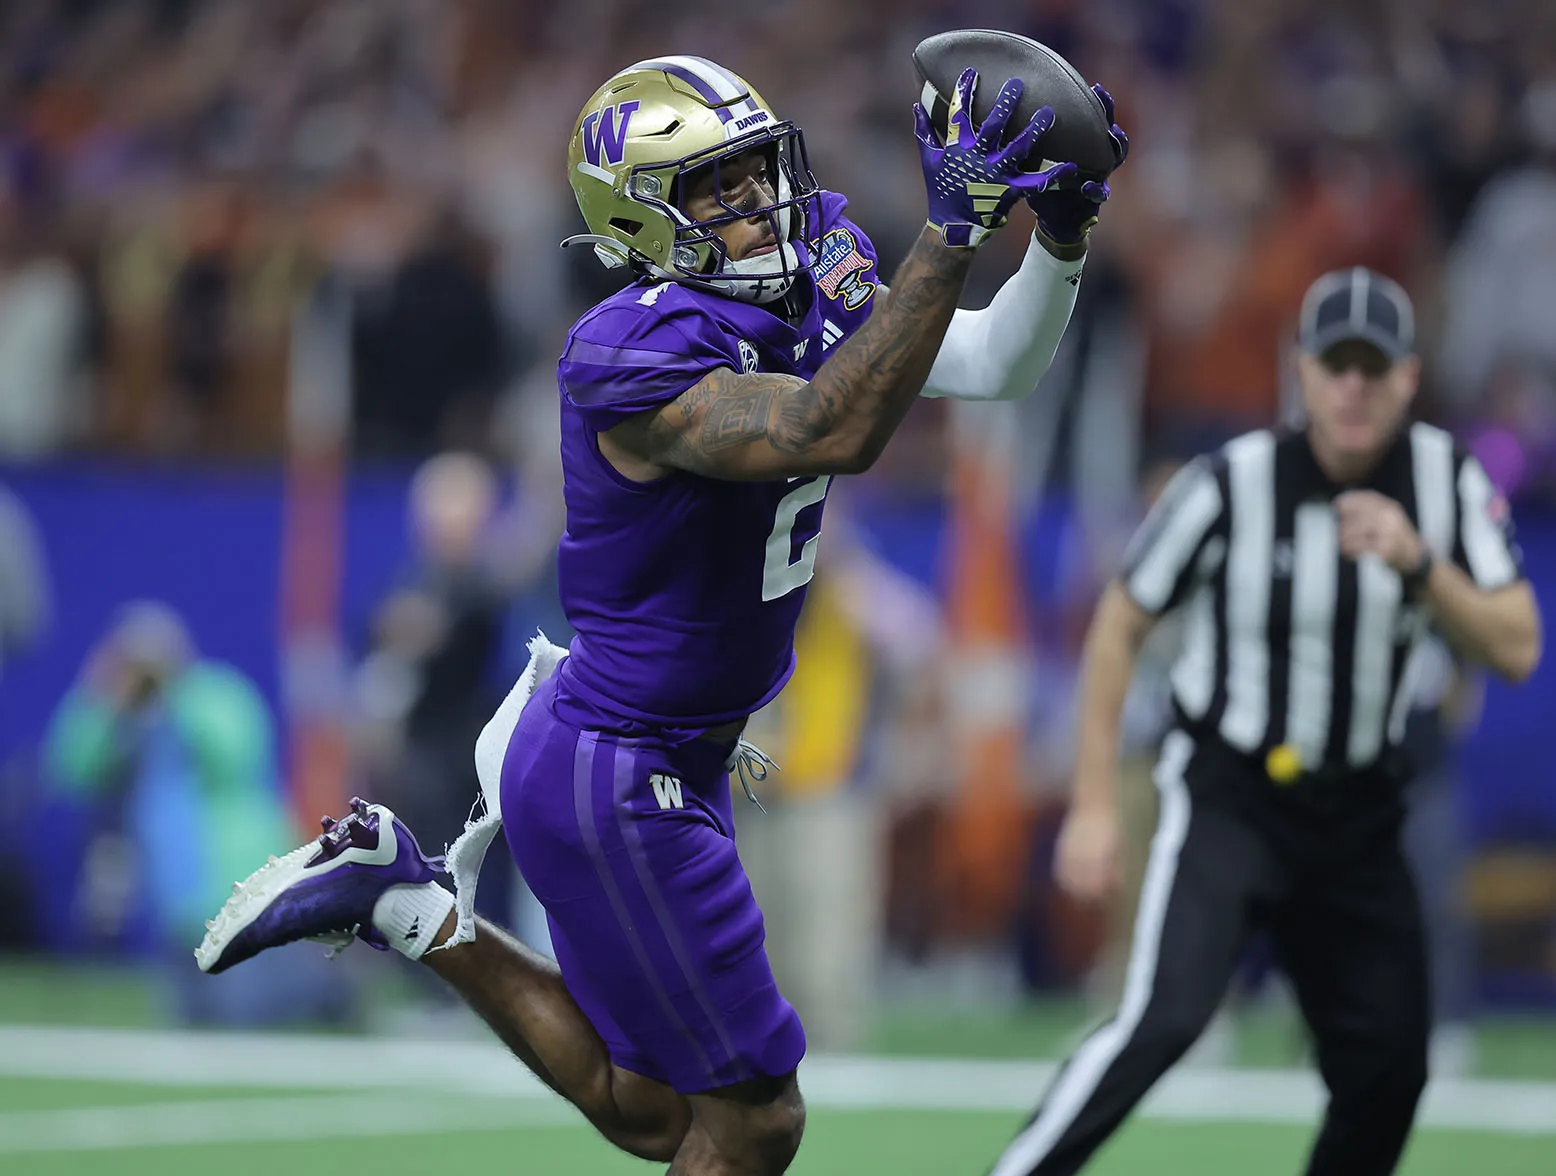 NEW ORLEANS, LOUISIANA - JANUARY 01: Ja'Lynn Polk #2 of the Washington Huskies catches a touchdown pass during the second quarter against the Texas Longhorns during the CFP Semifinal Allstate Sugar Bowl at Caesars Superdome on January 01, 2024 in New Orleans, Louisiana. (Photo by Jonathan Bachman/Getty Images)